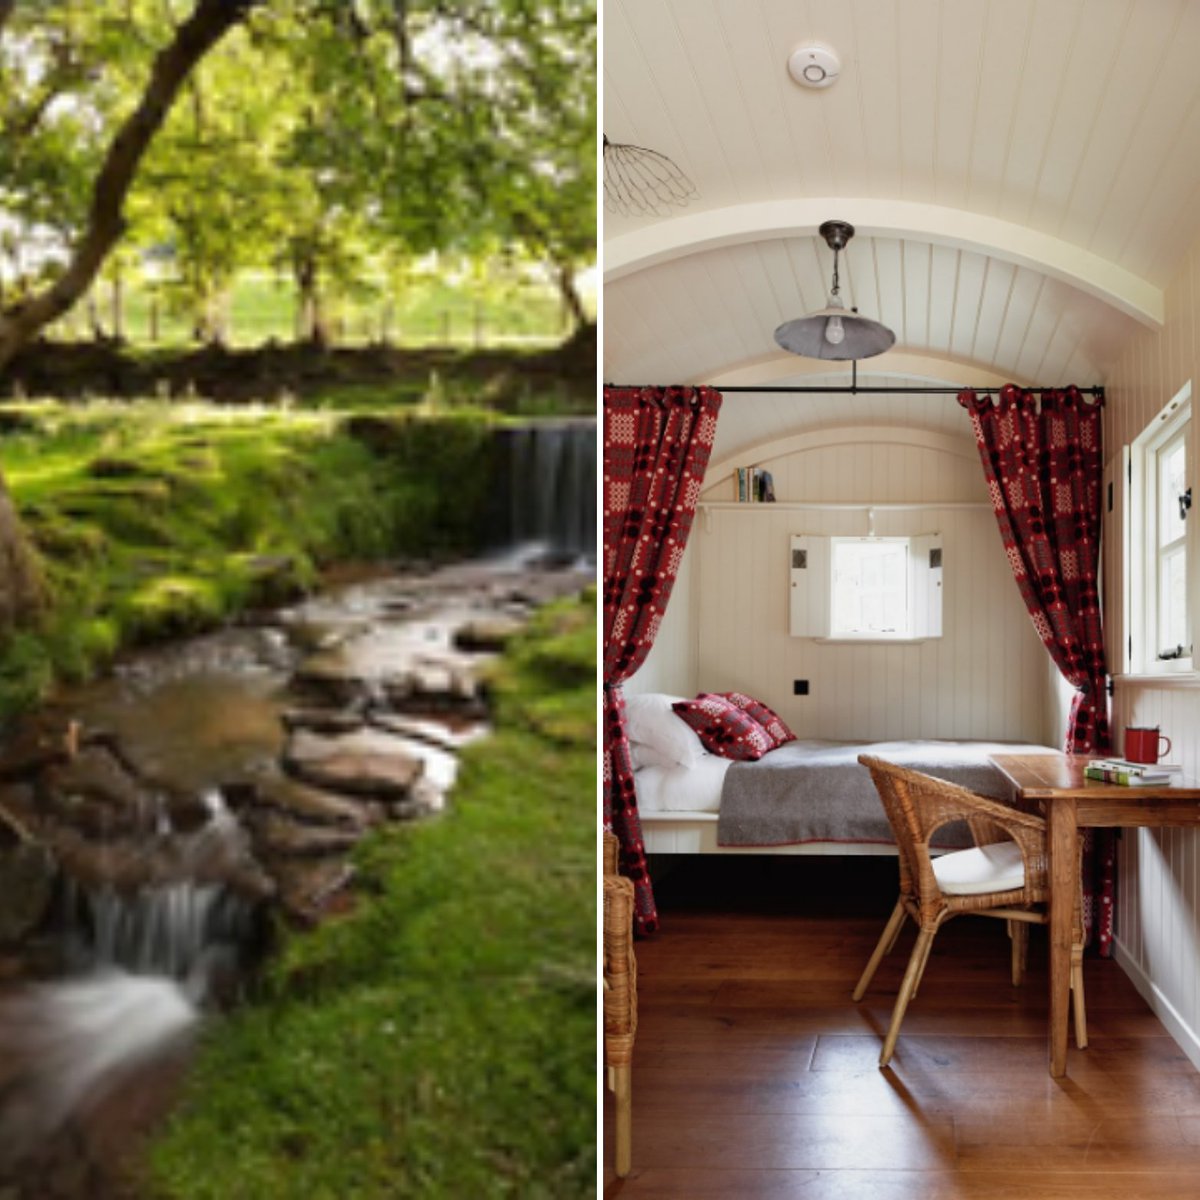 Do you fancy staying in luxury #Shepherdhuts this summer? Wake up to the sounds of nature. Located near Hay on Wye so you can explore this lovely market town or hire a canoe & have some fun on the river #summer #Shepherdhuts #Greatoutdoors. Book here
bit.ly/2TCZegi